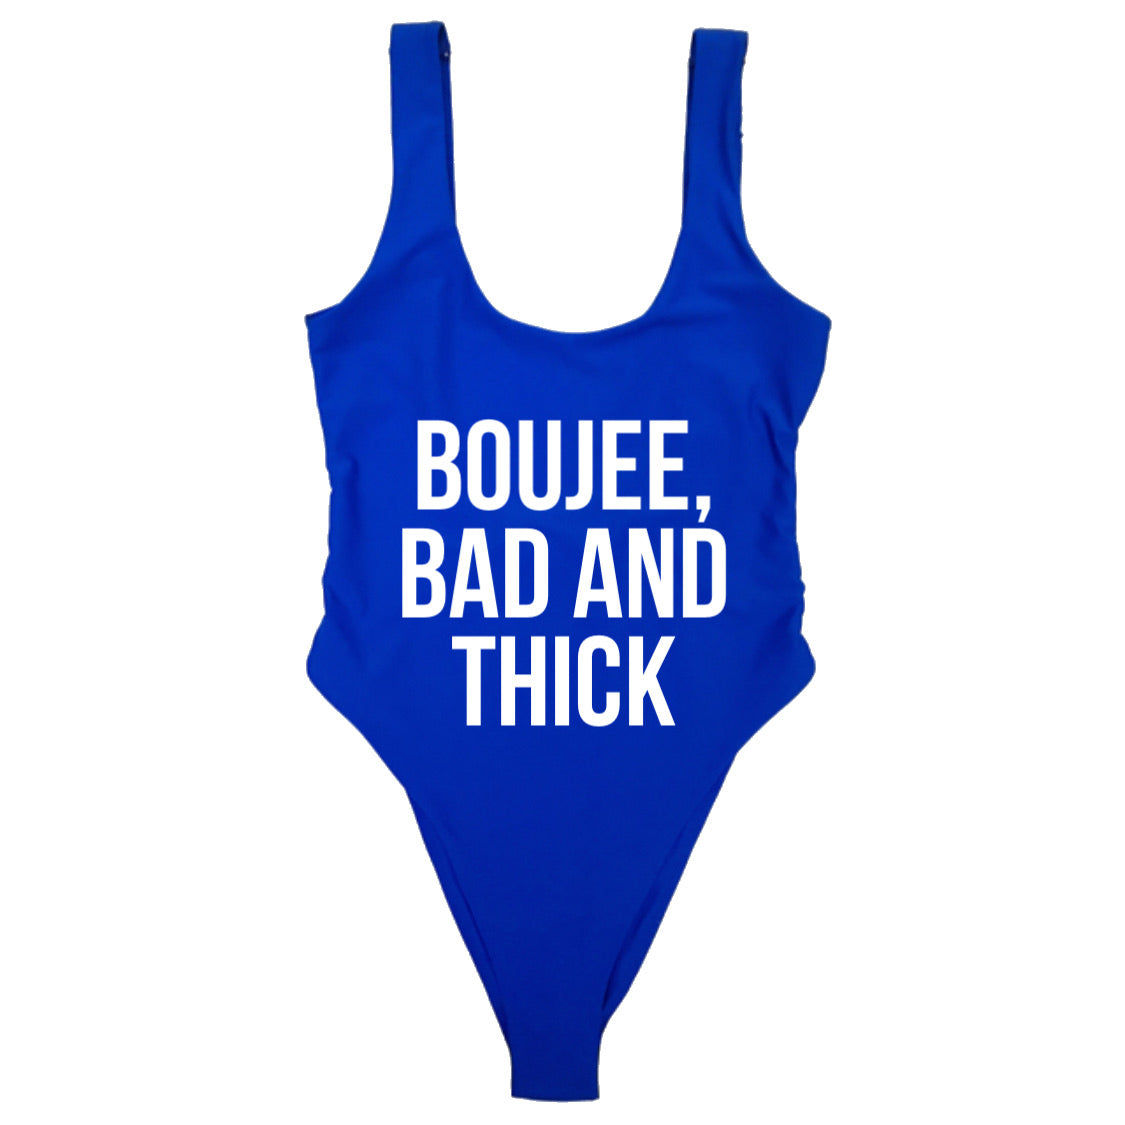 BOUJEE, BAD AND THICK